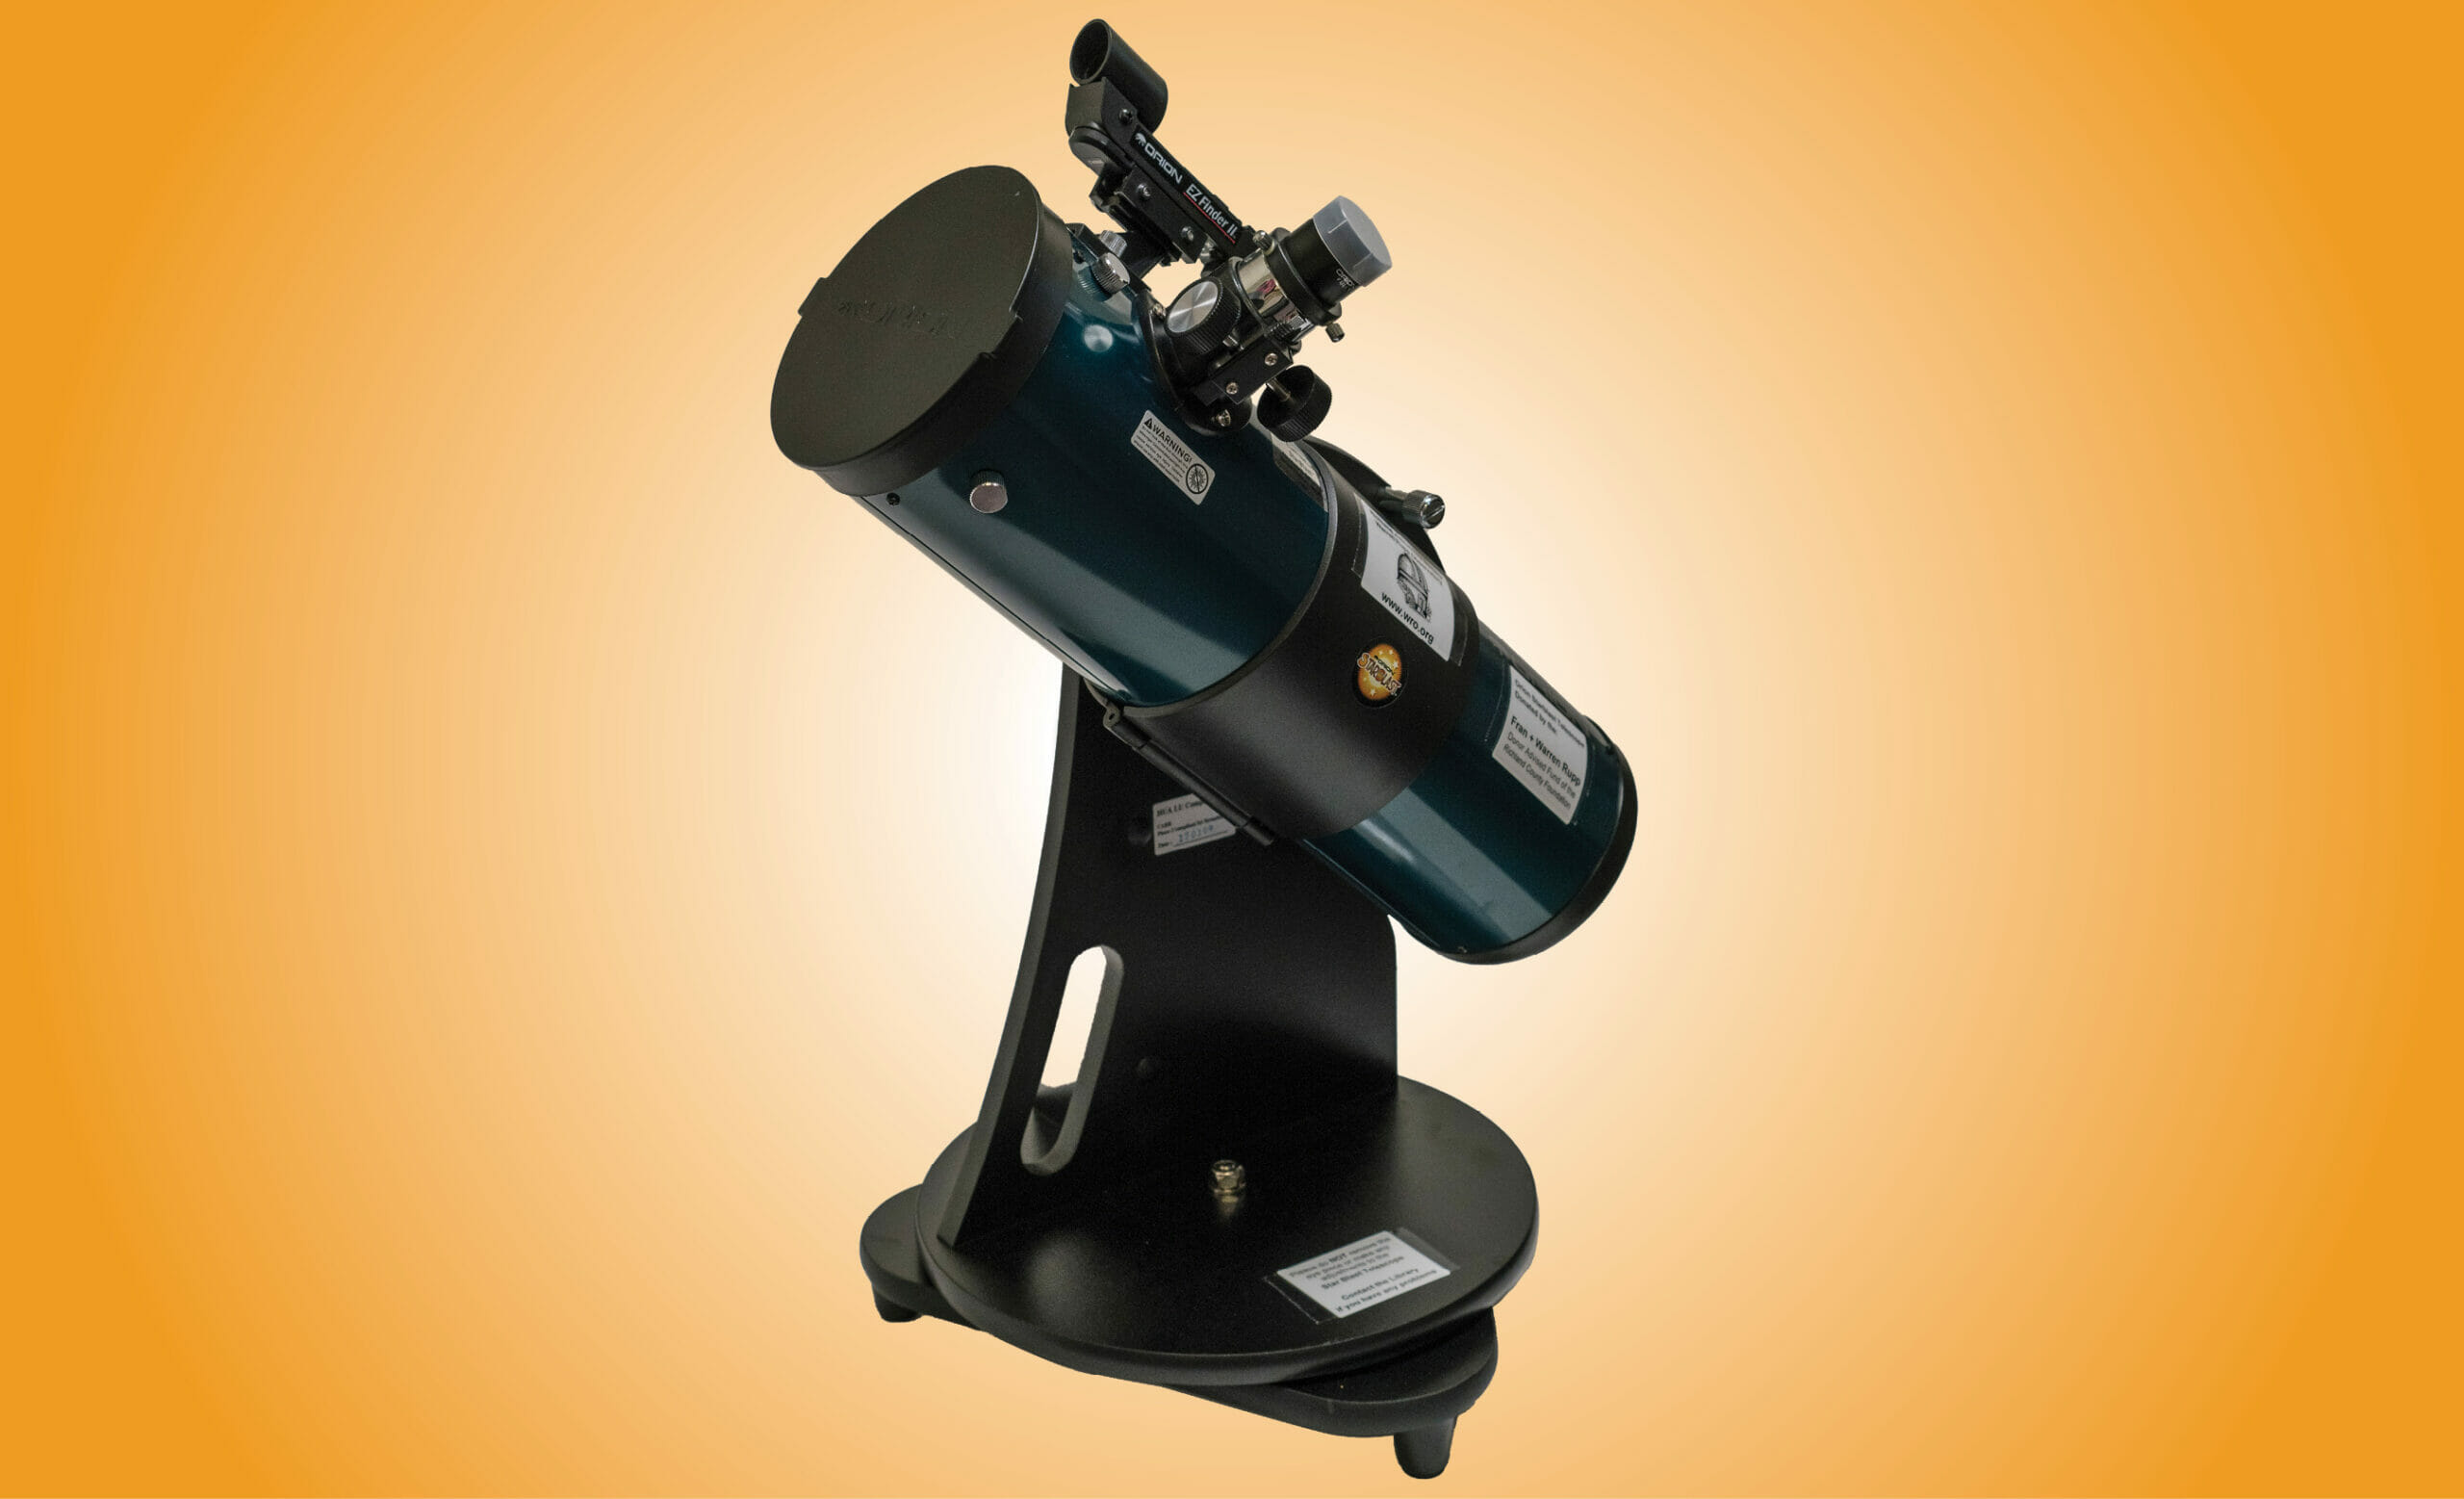 Our grab-and-go telescope is designed for entry-level and intermediate astronomy enthusiasts.